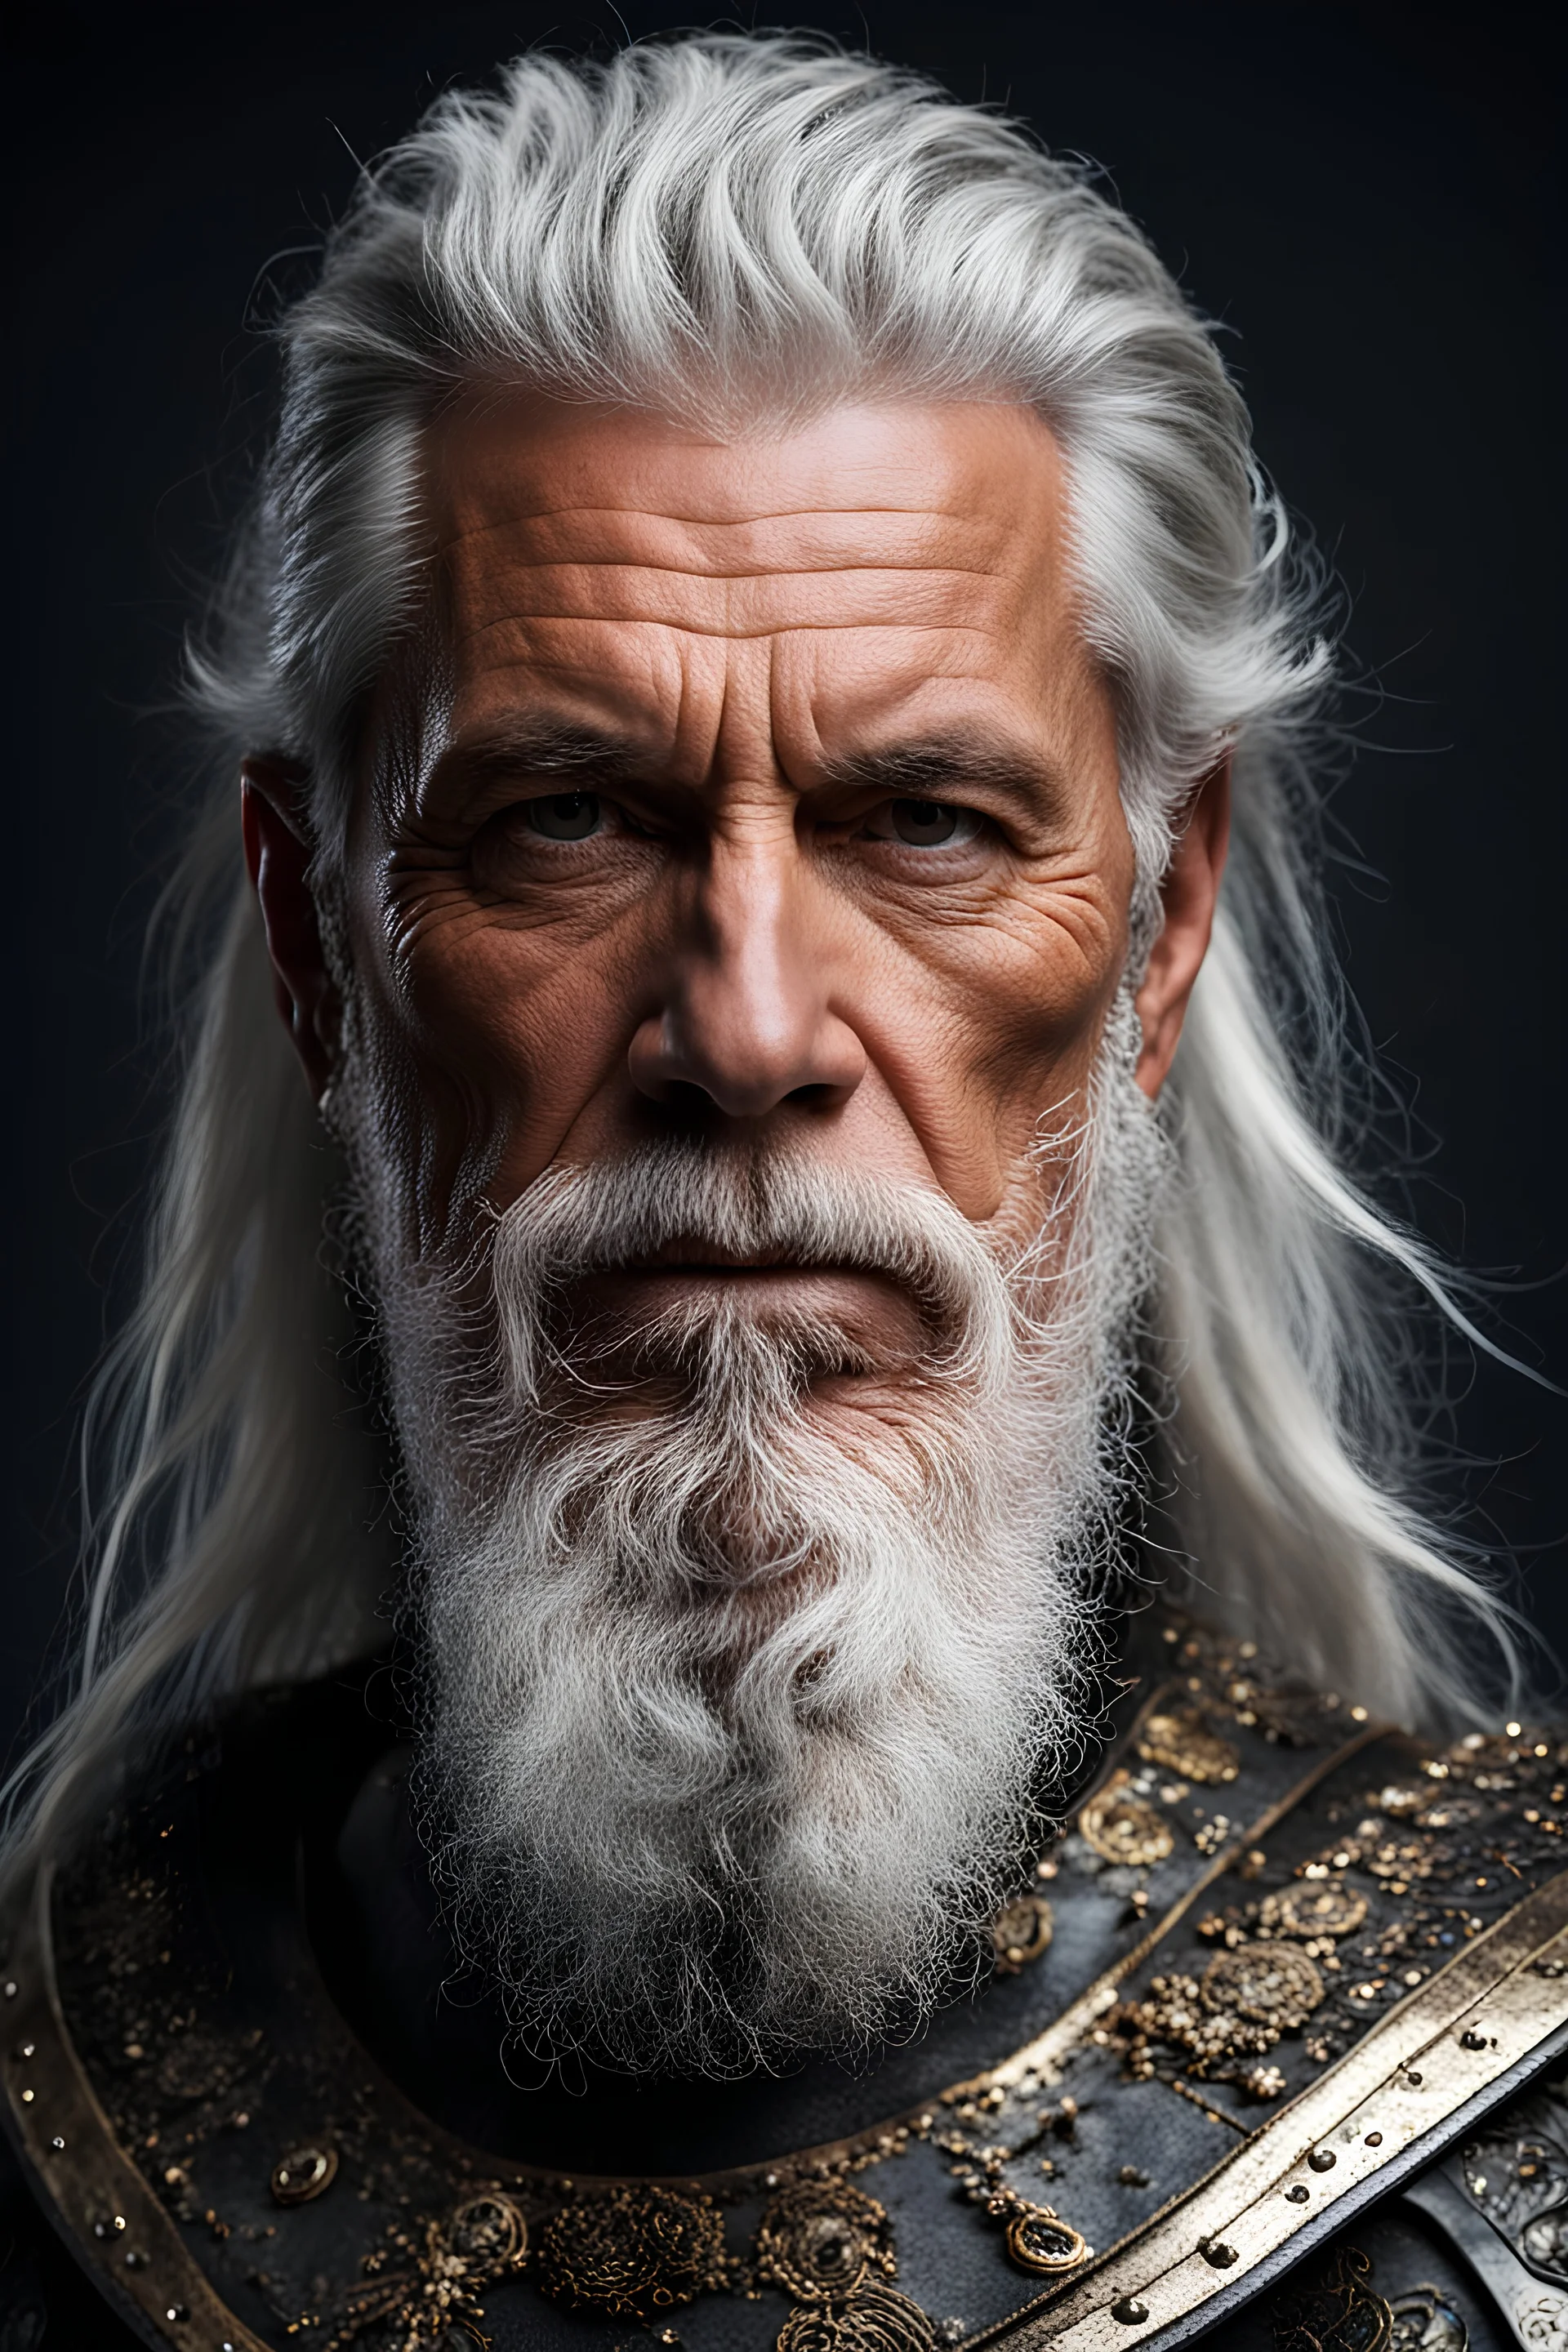 portrait of a 55 year old warrior with salt and pepper hair. His beard is neatly trimmed. Fantasy, hyperrealistic